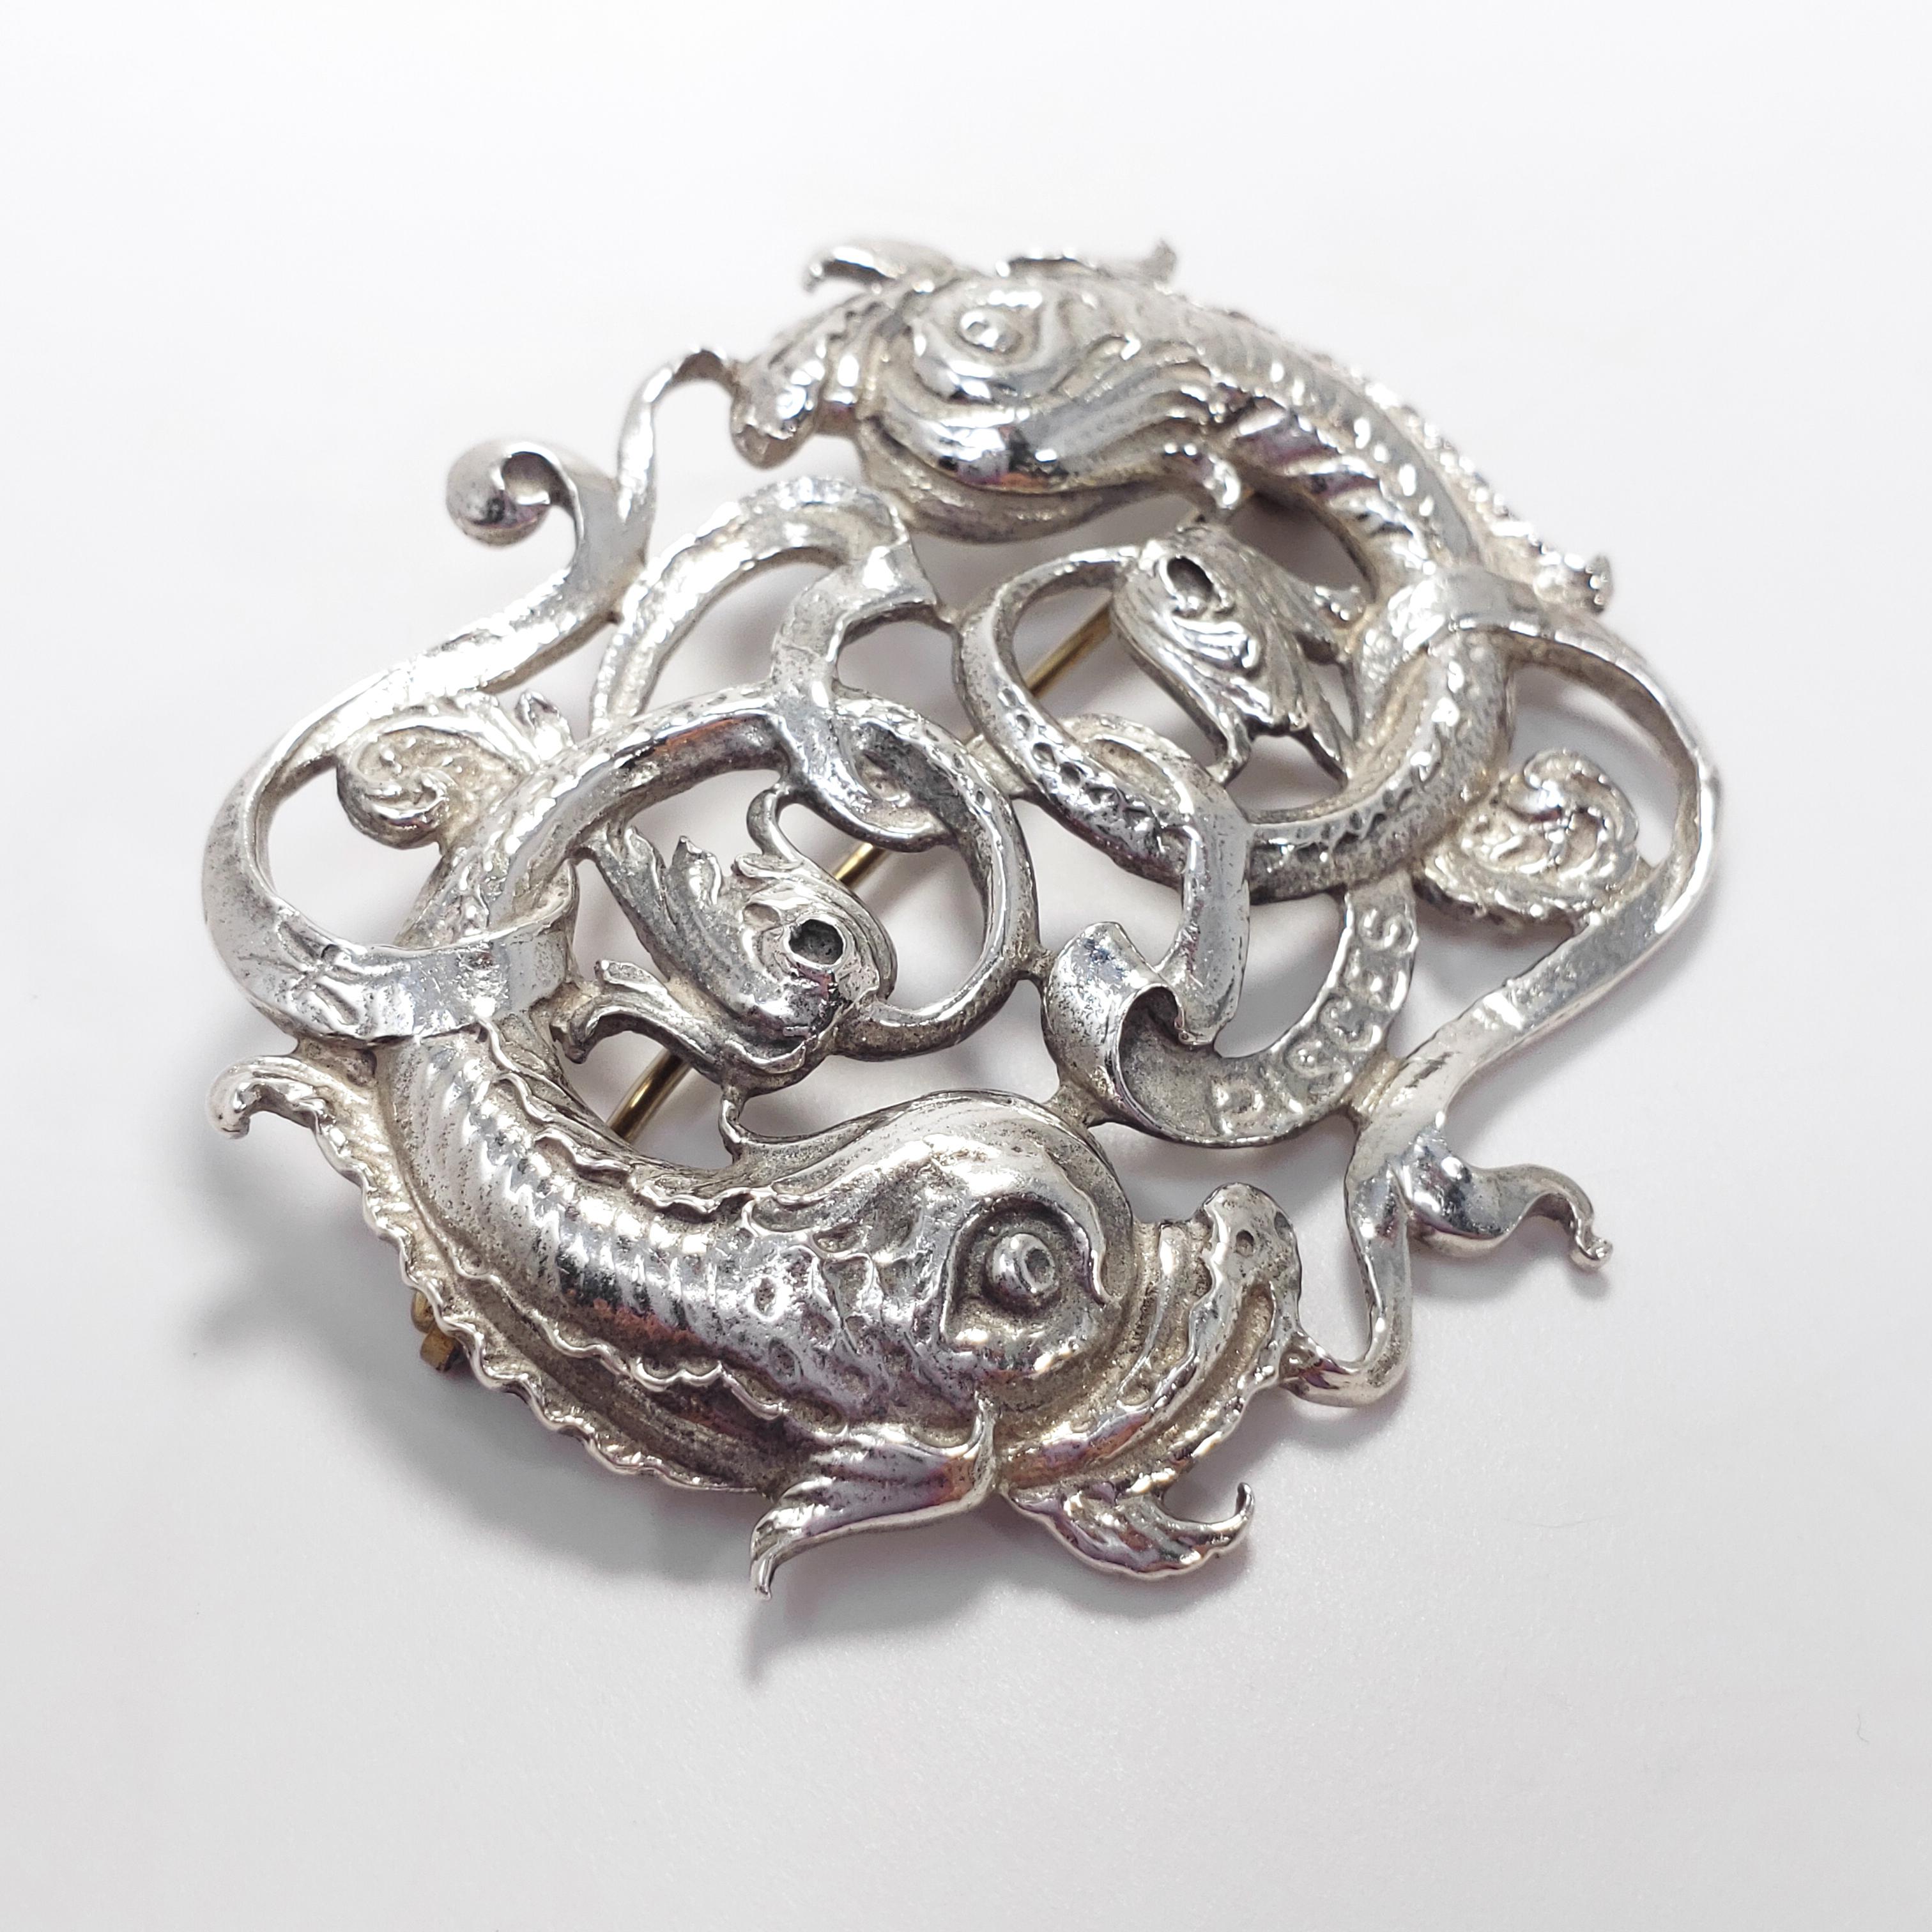 A perfect pin for a Pisces! Features the two iconic Pisces fish adorned with various motifs, all in sterling silver. From Guglielmo Cini's sterling silver collection.

Hallmarks: Sterling by Cini